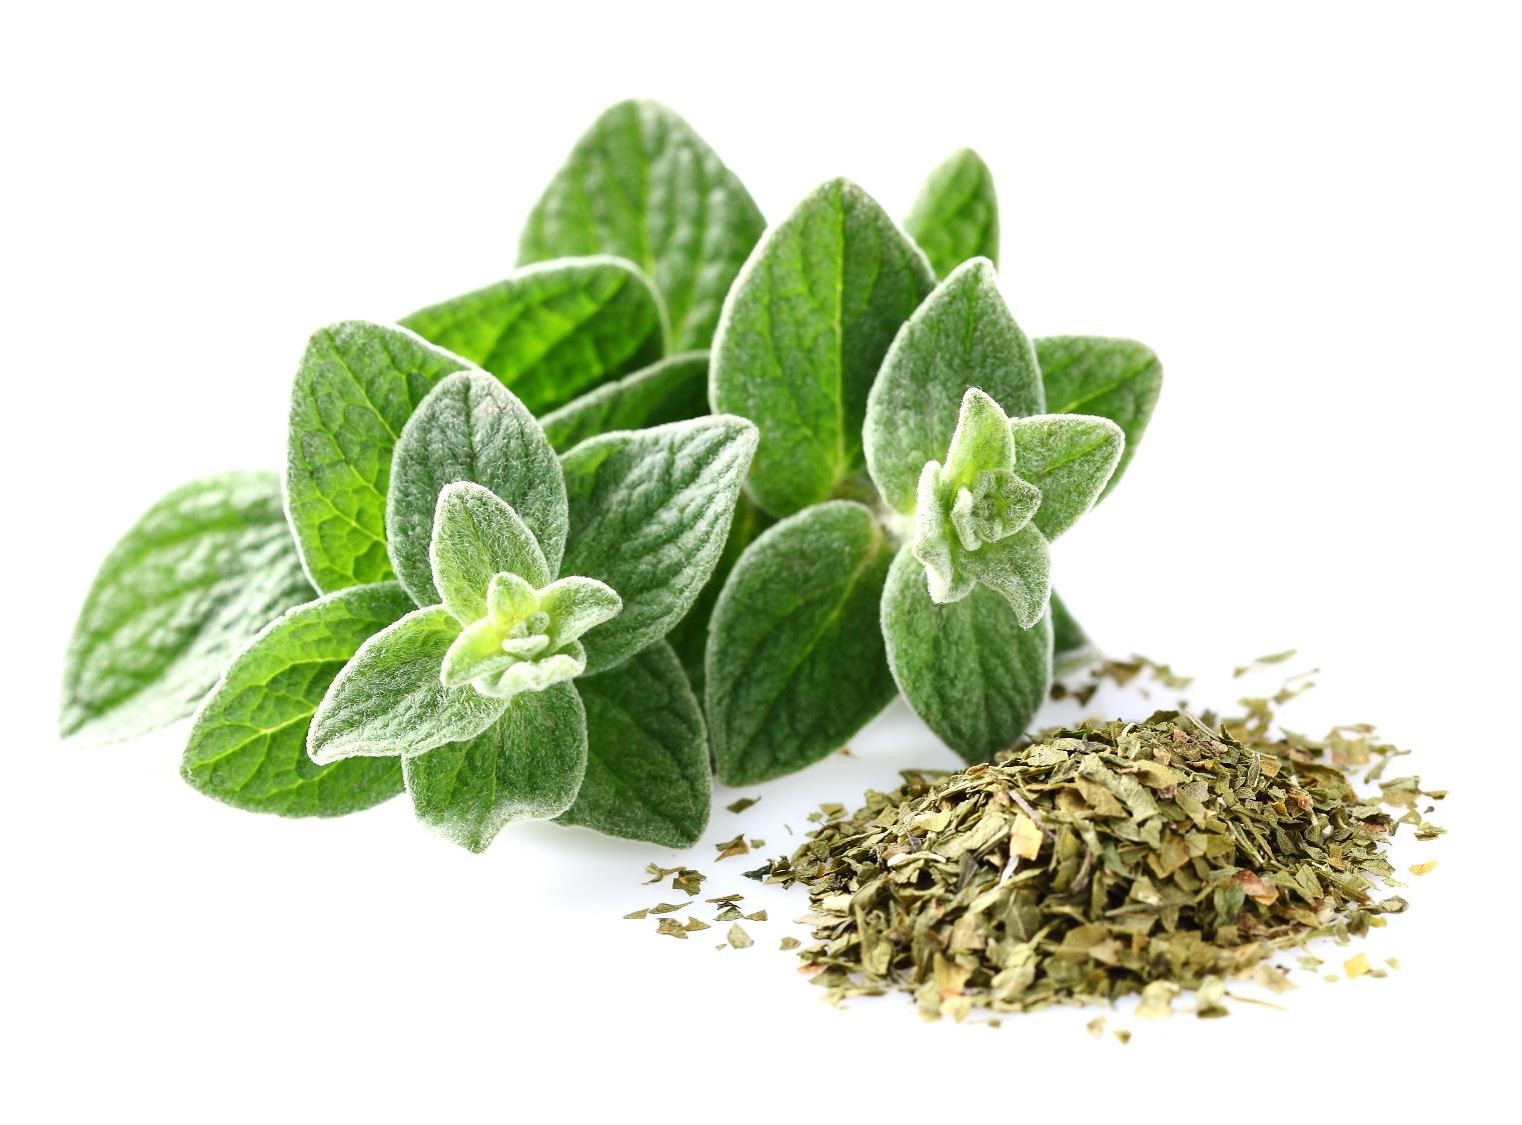 FIND OUT MORE ABOUT OREGANO